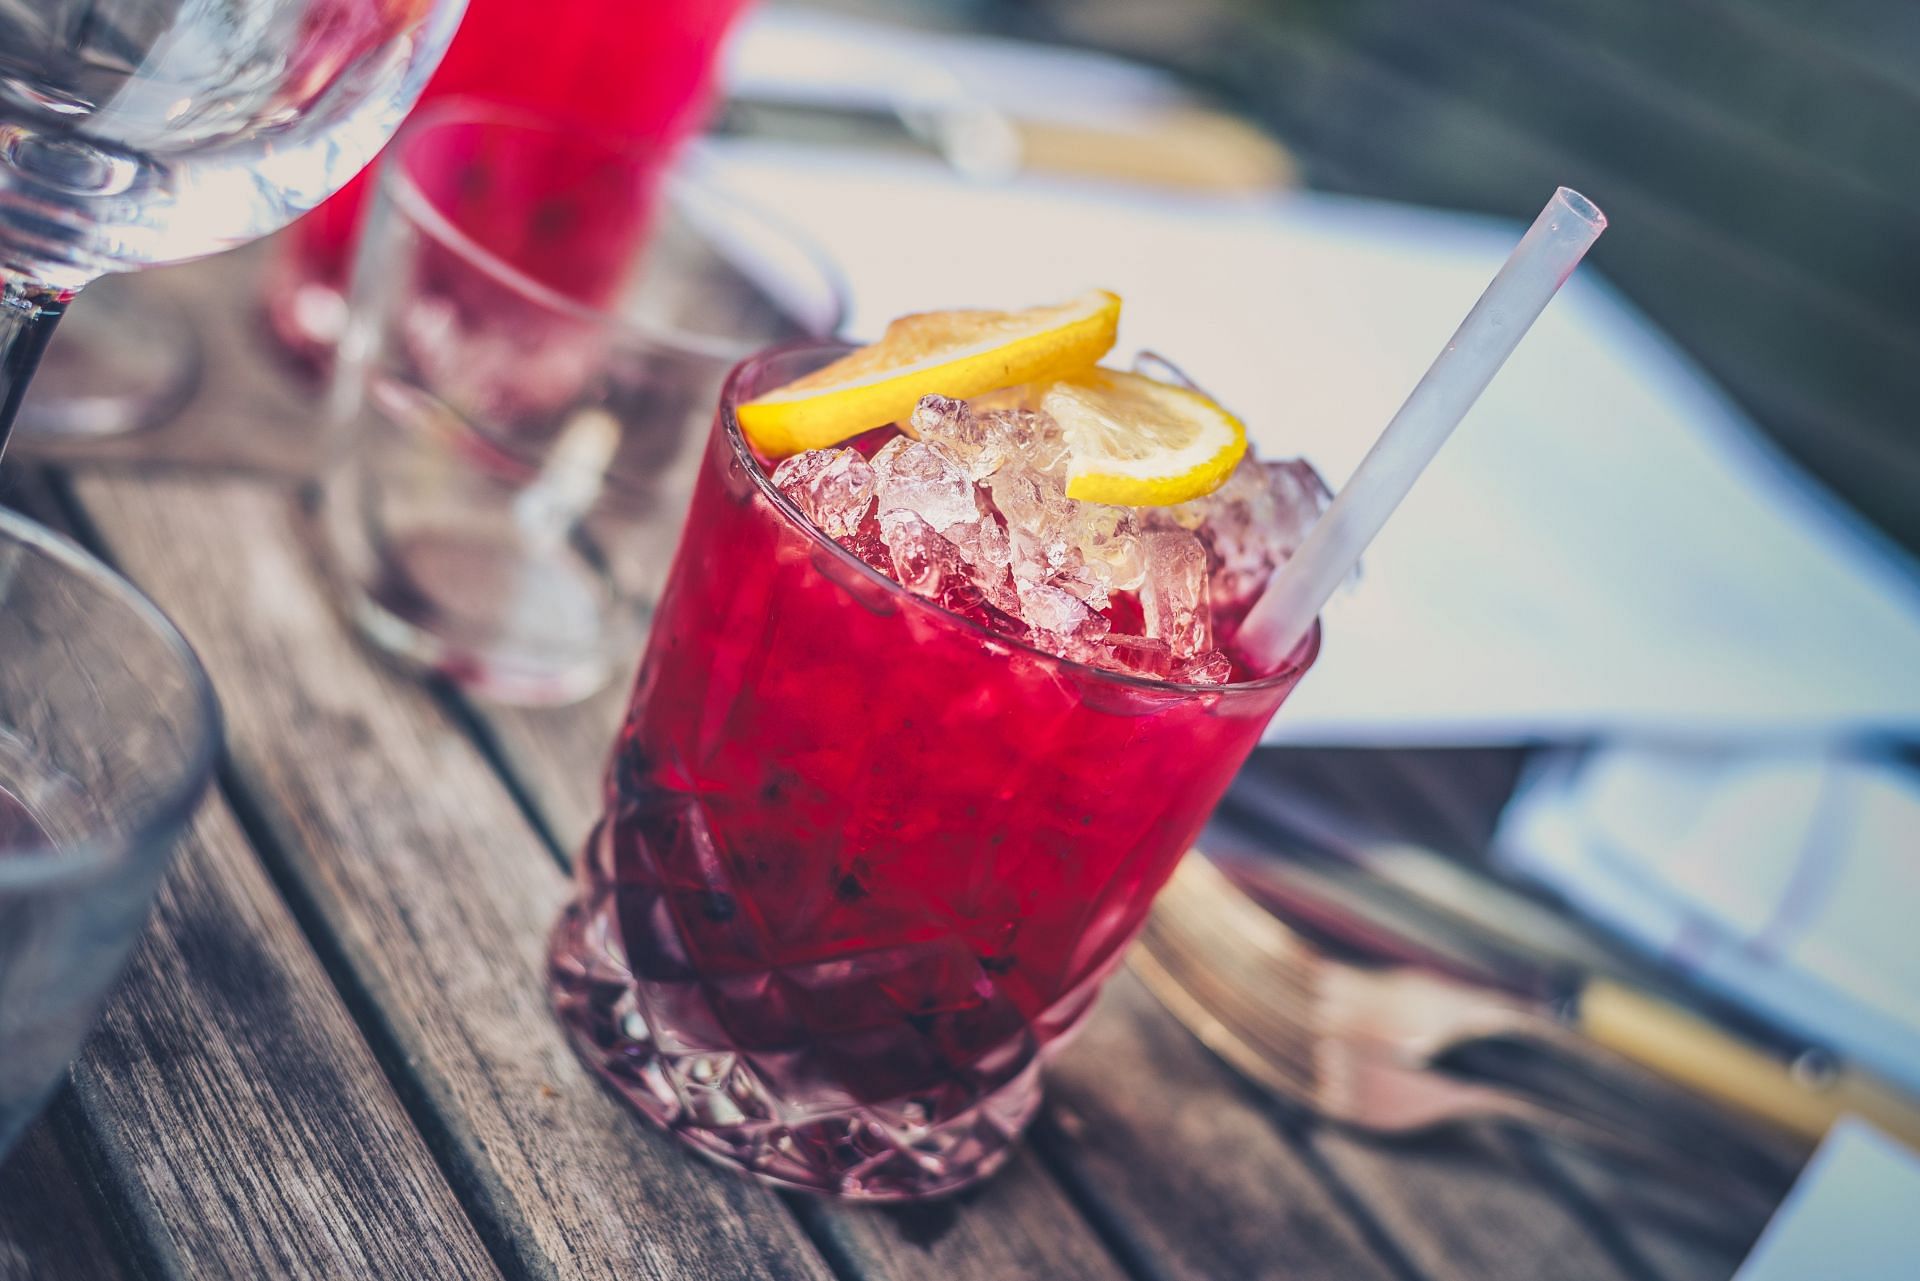 Drinking cranberry juice for UTI can prevent further infection. (Image via Unsplash/Jez Timms)